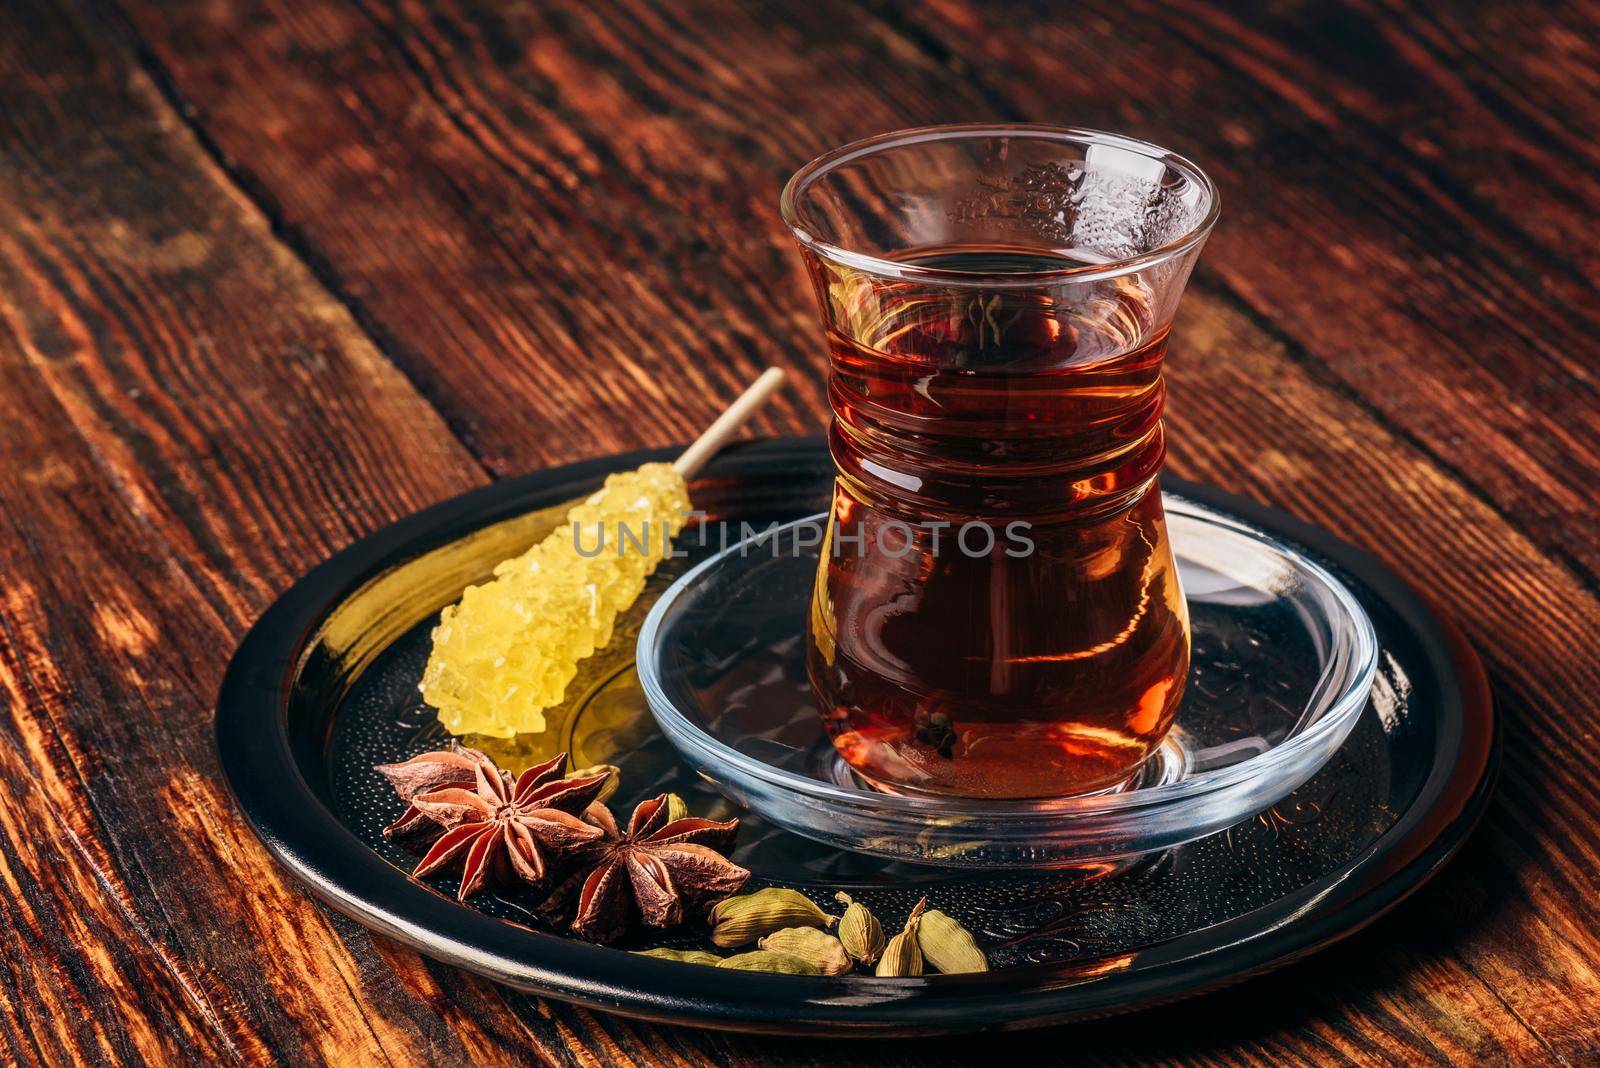 Oriental glass with tea spices on tray by Seva_blsv